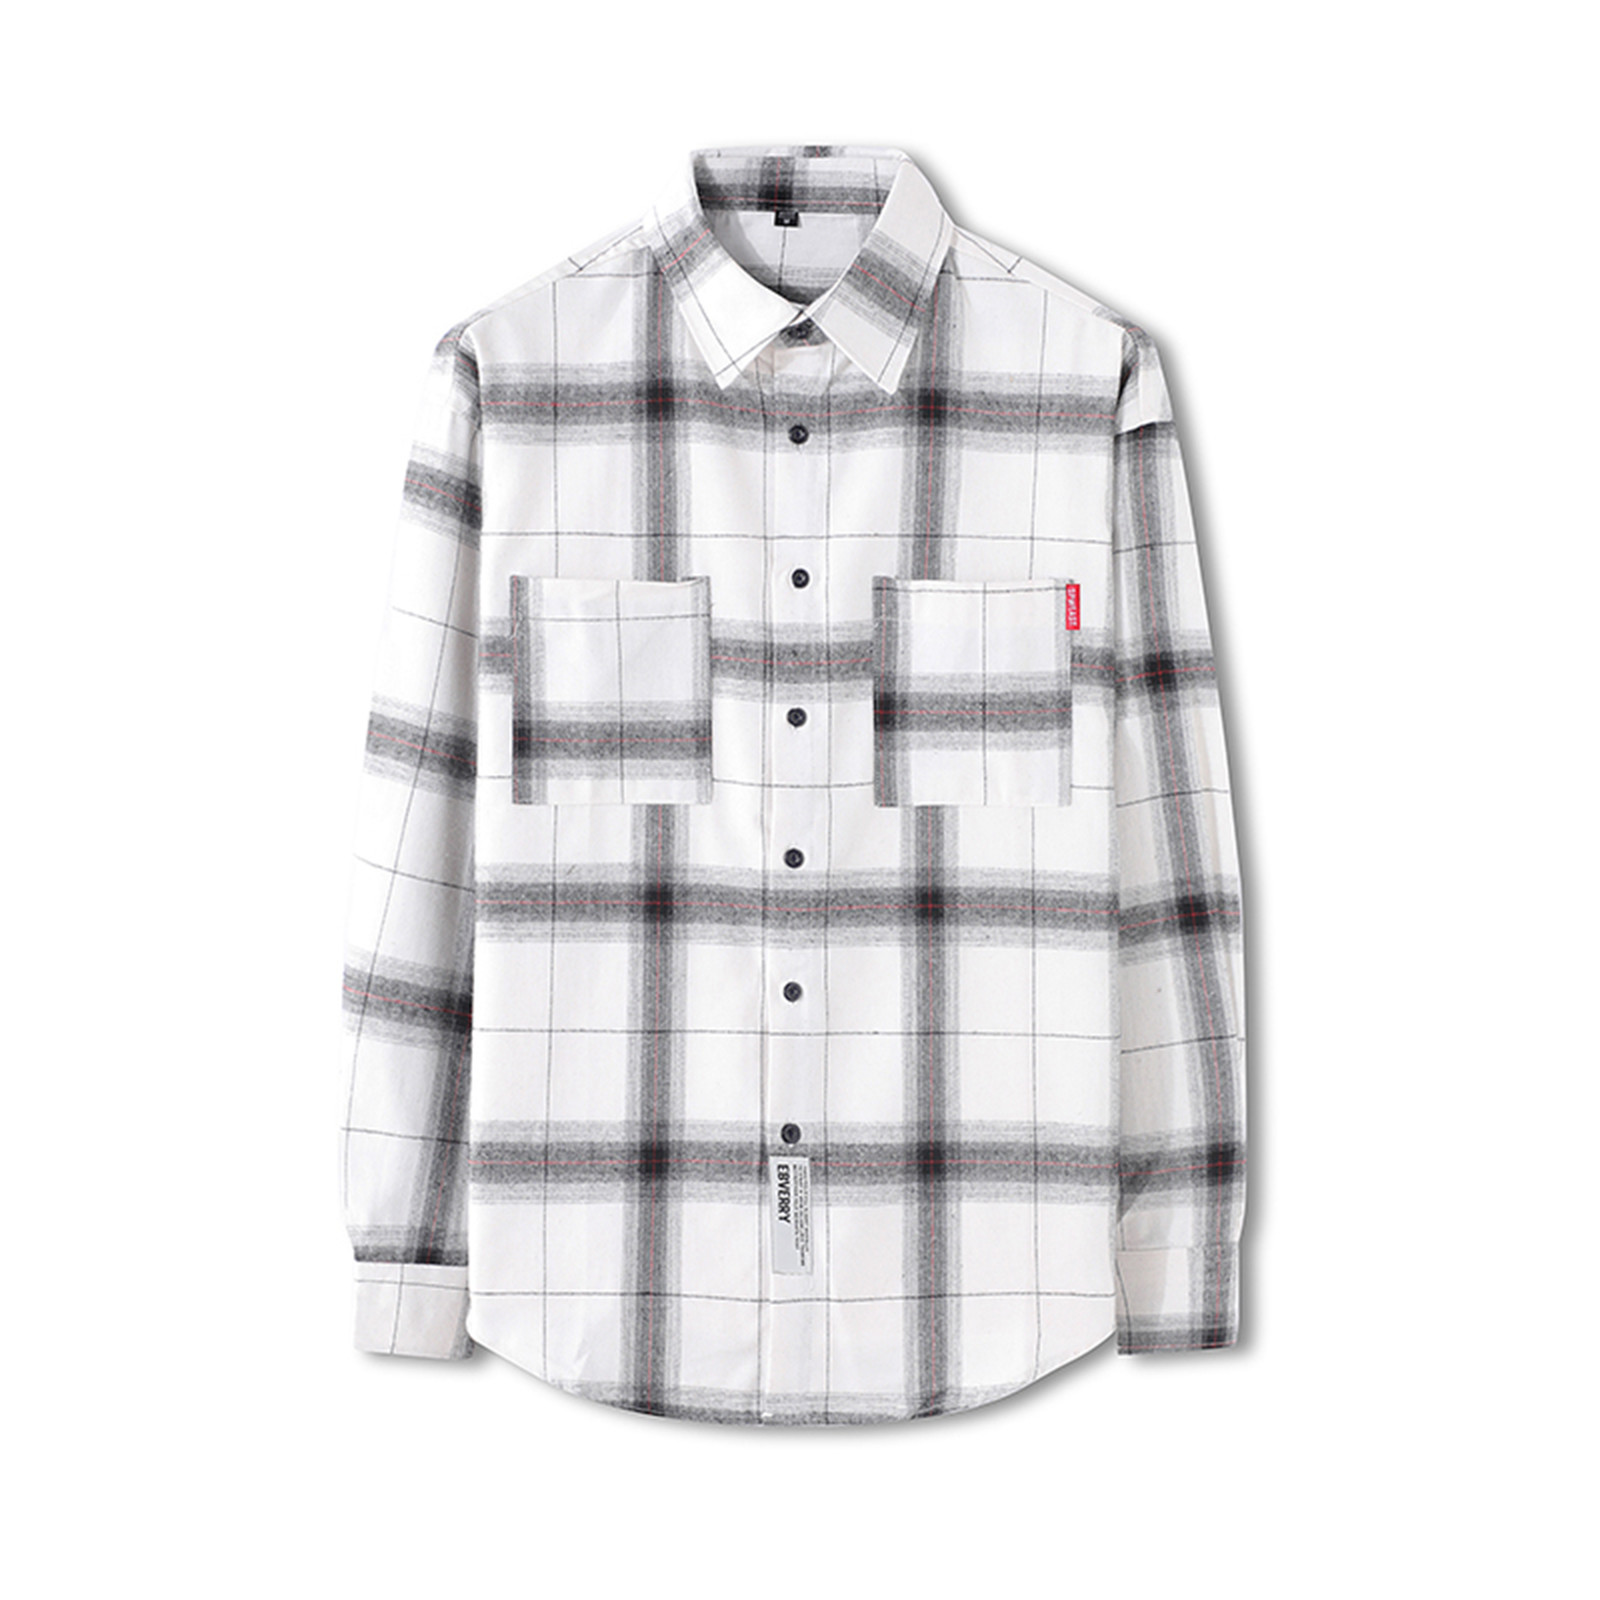 Teissuly The New Men's Regular-fit Long-Sleeve Plaid Flannel Shirt ...